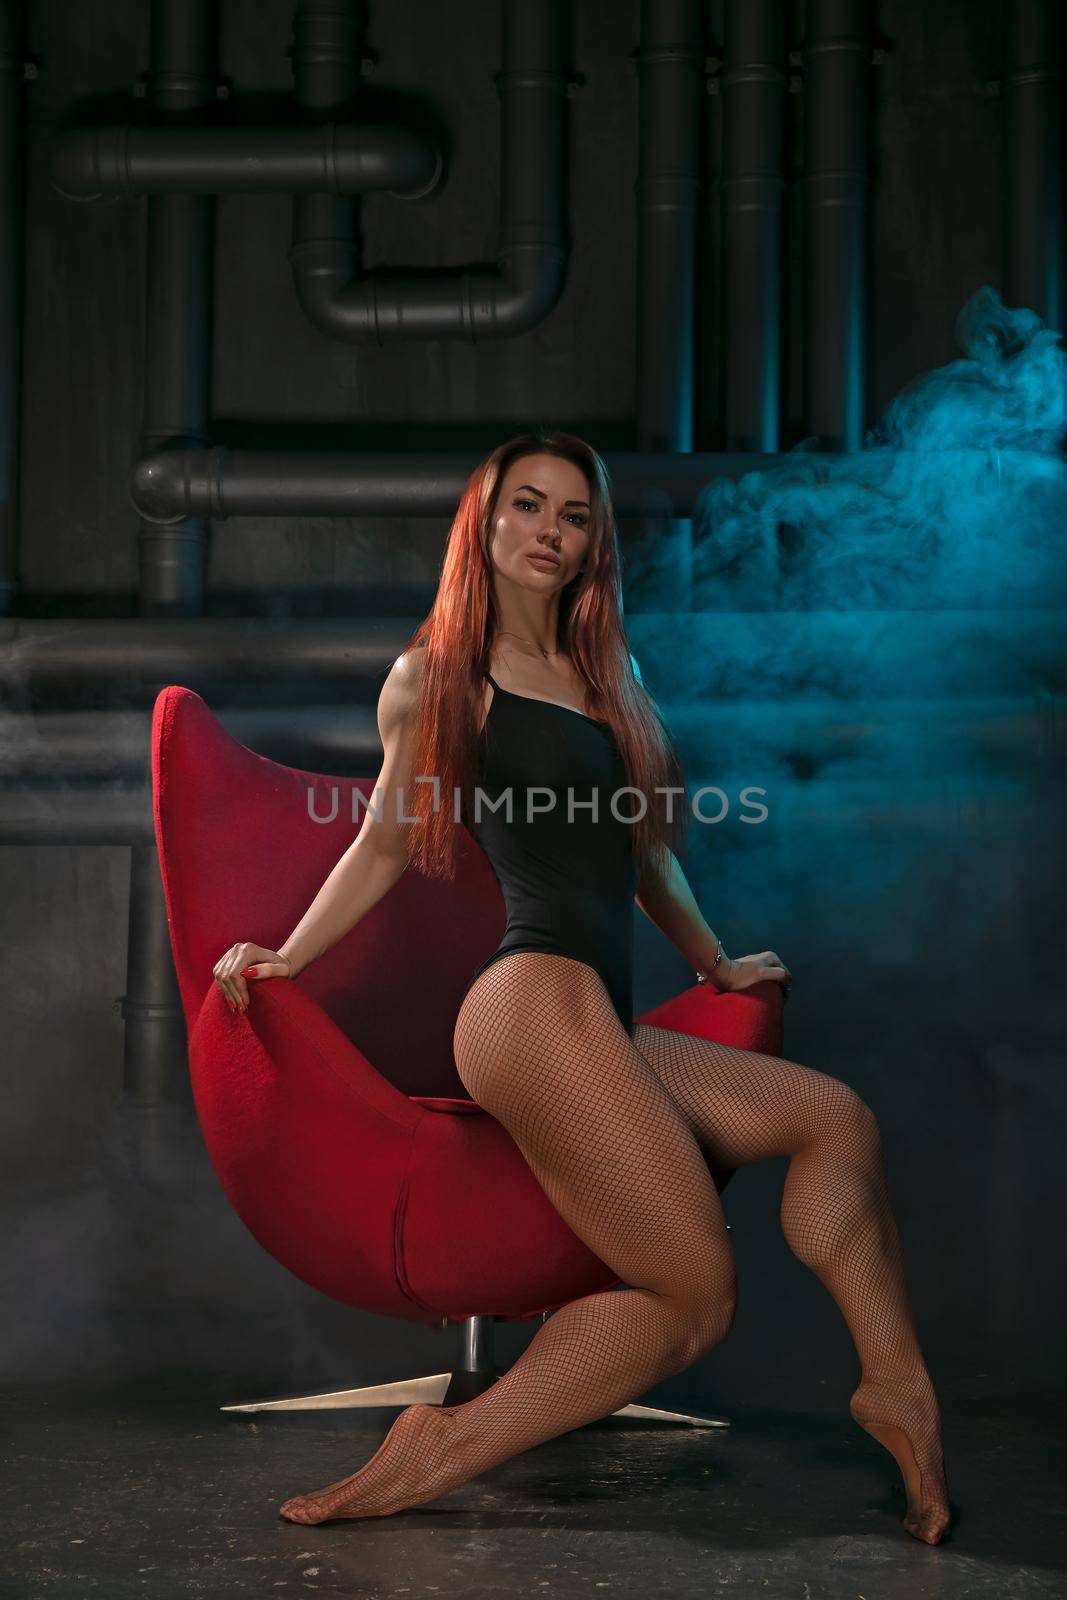 Bright girl with sexy legs posing in a red chair by but_photo